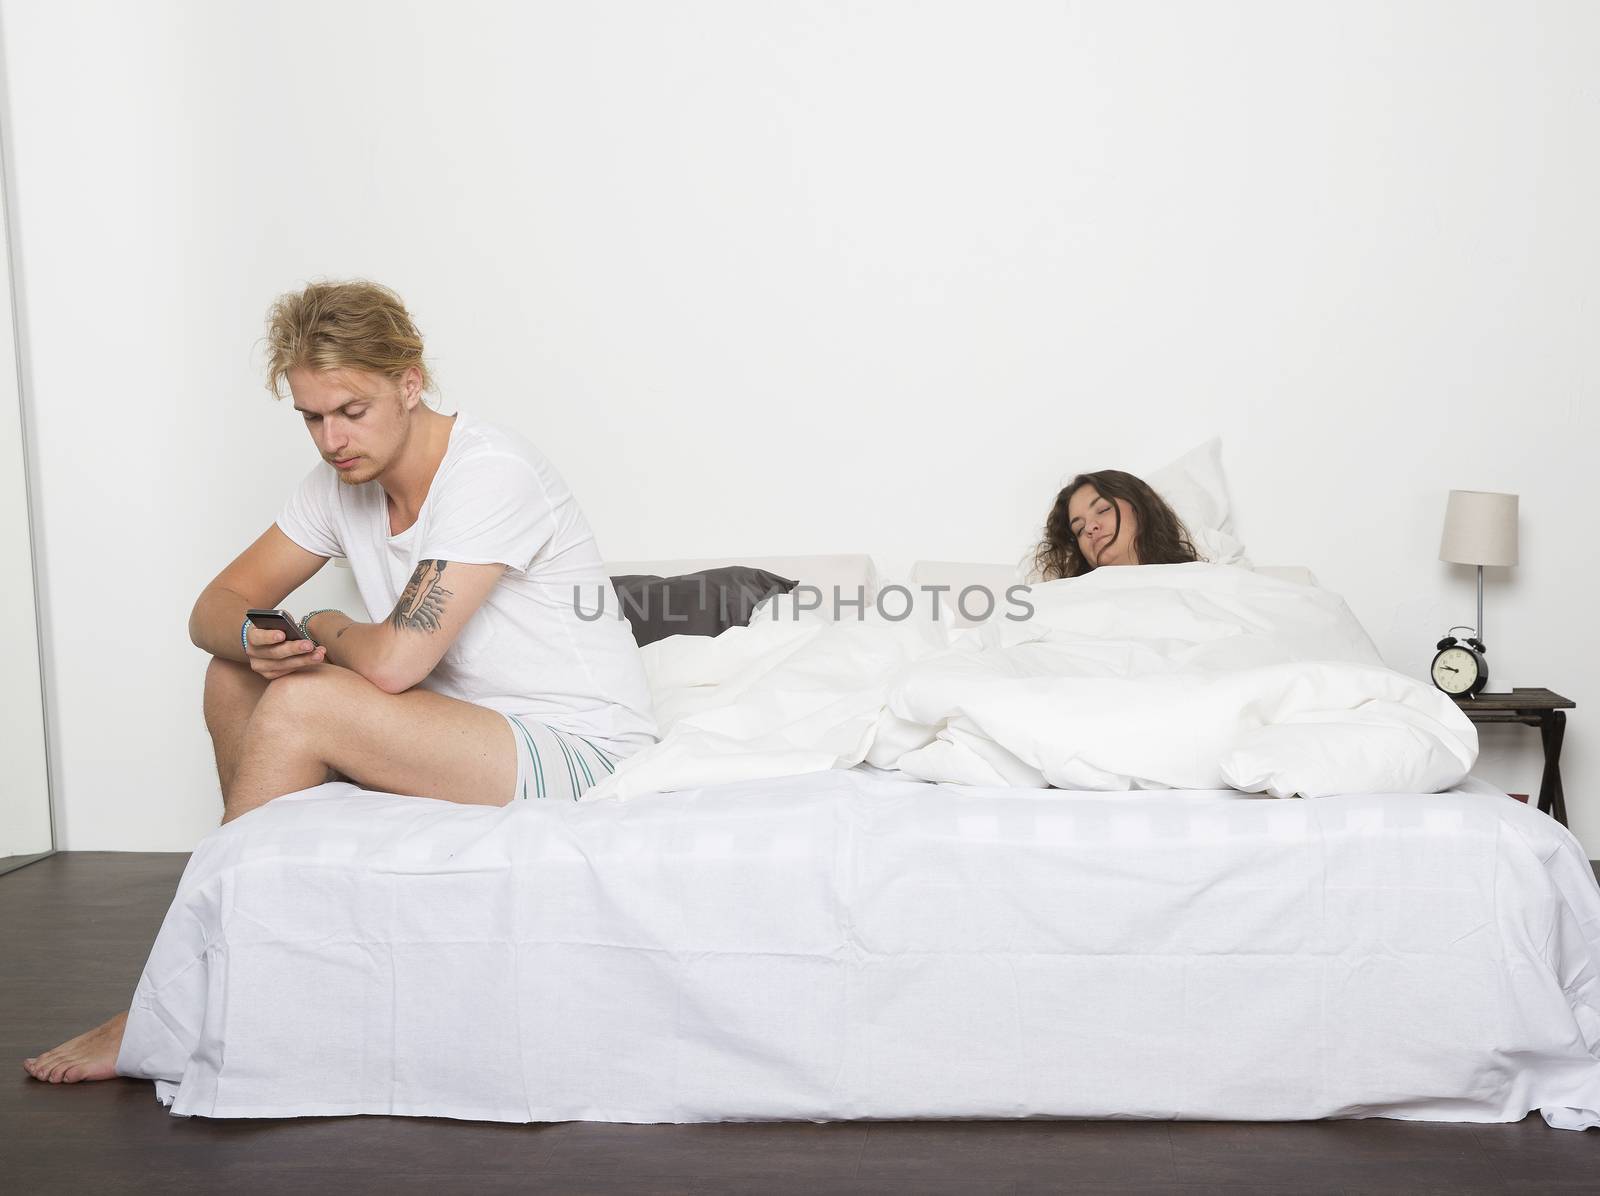 Man with his telephone while the wife sleeps